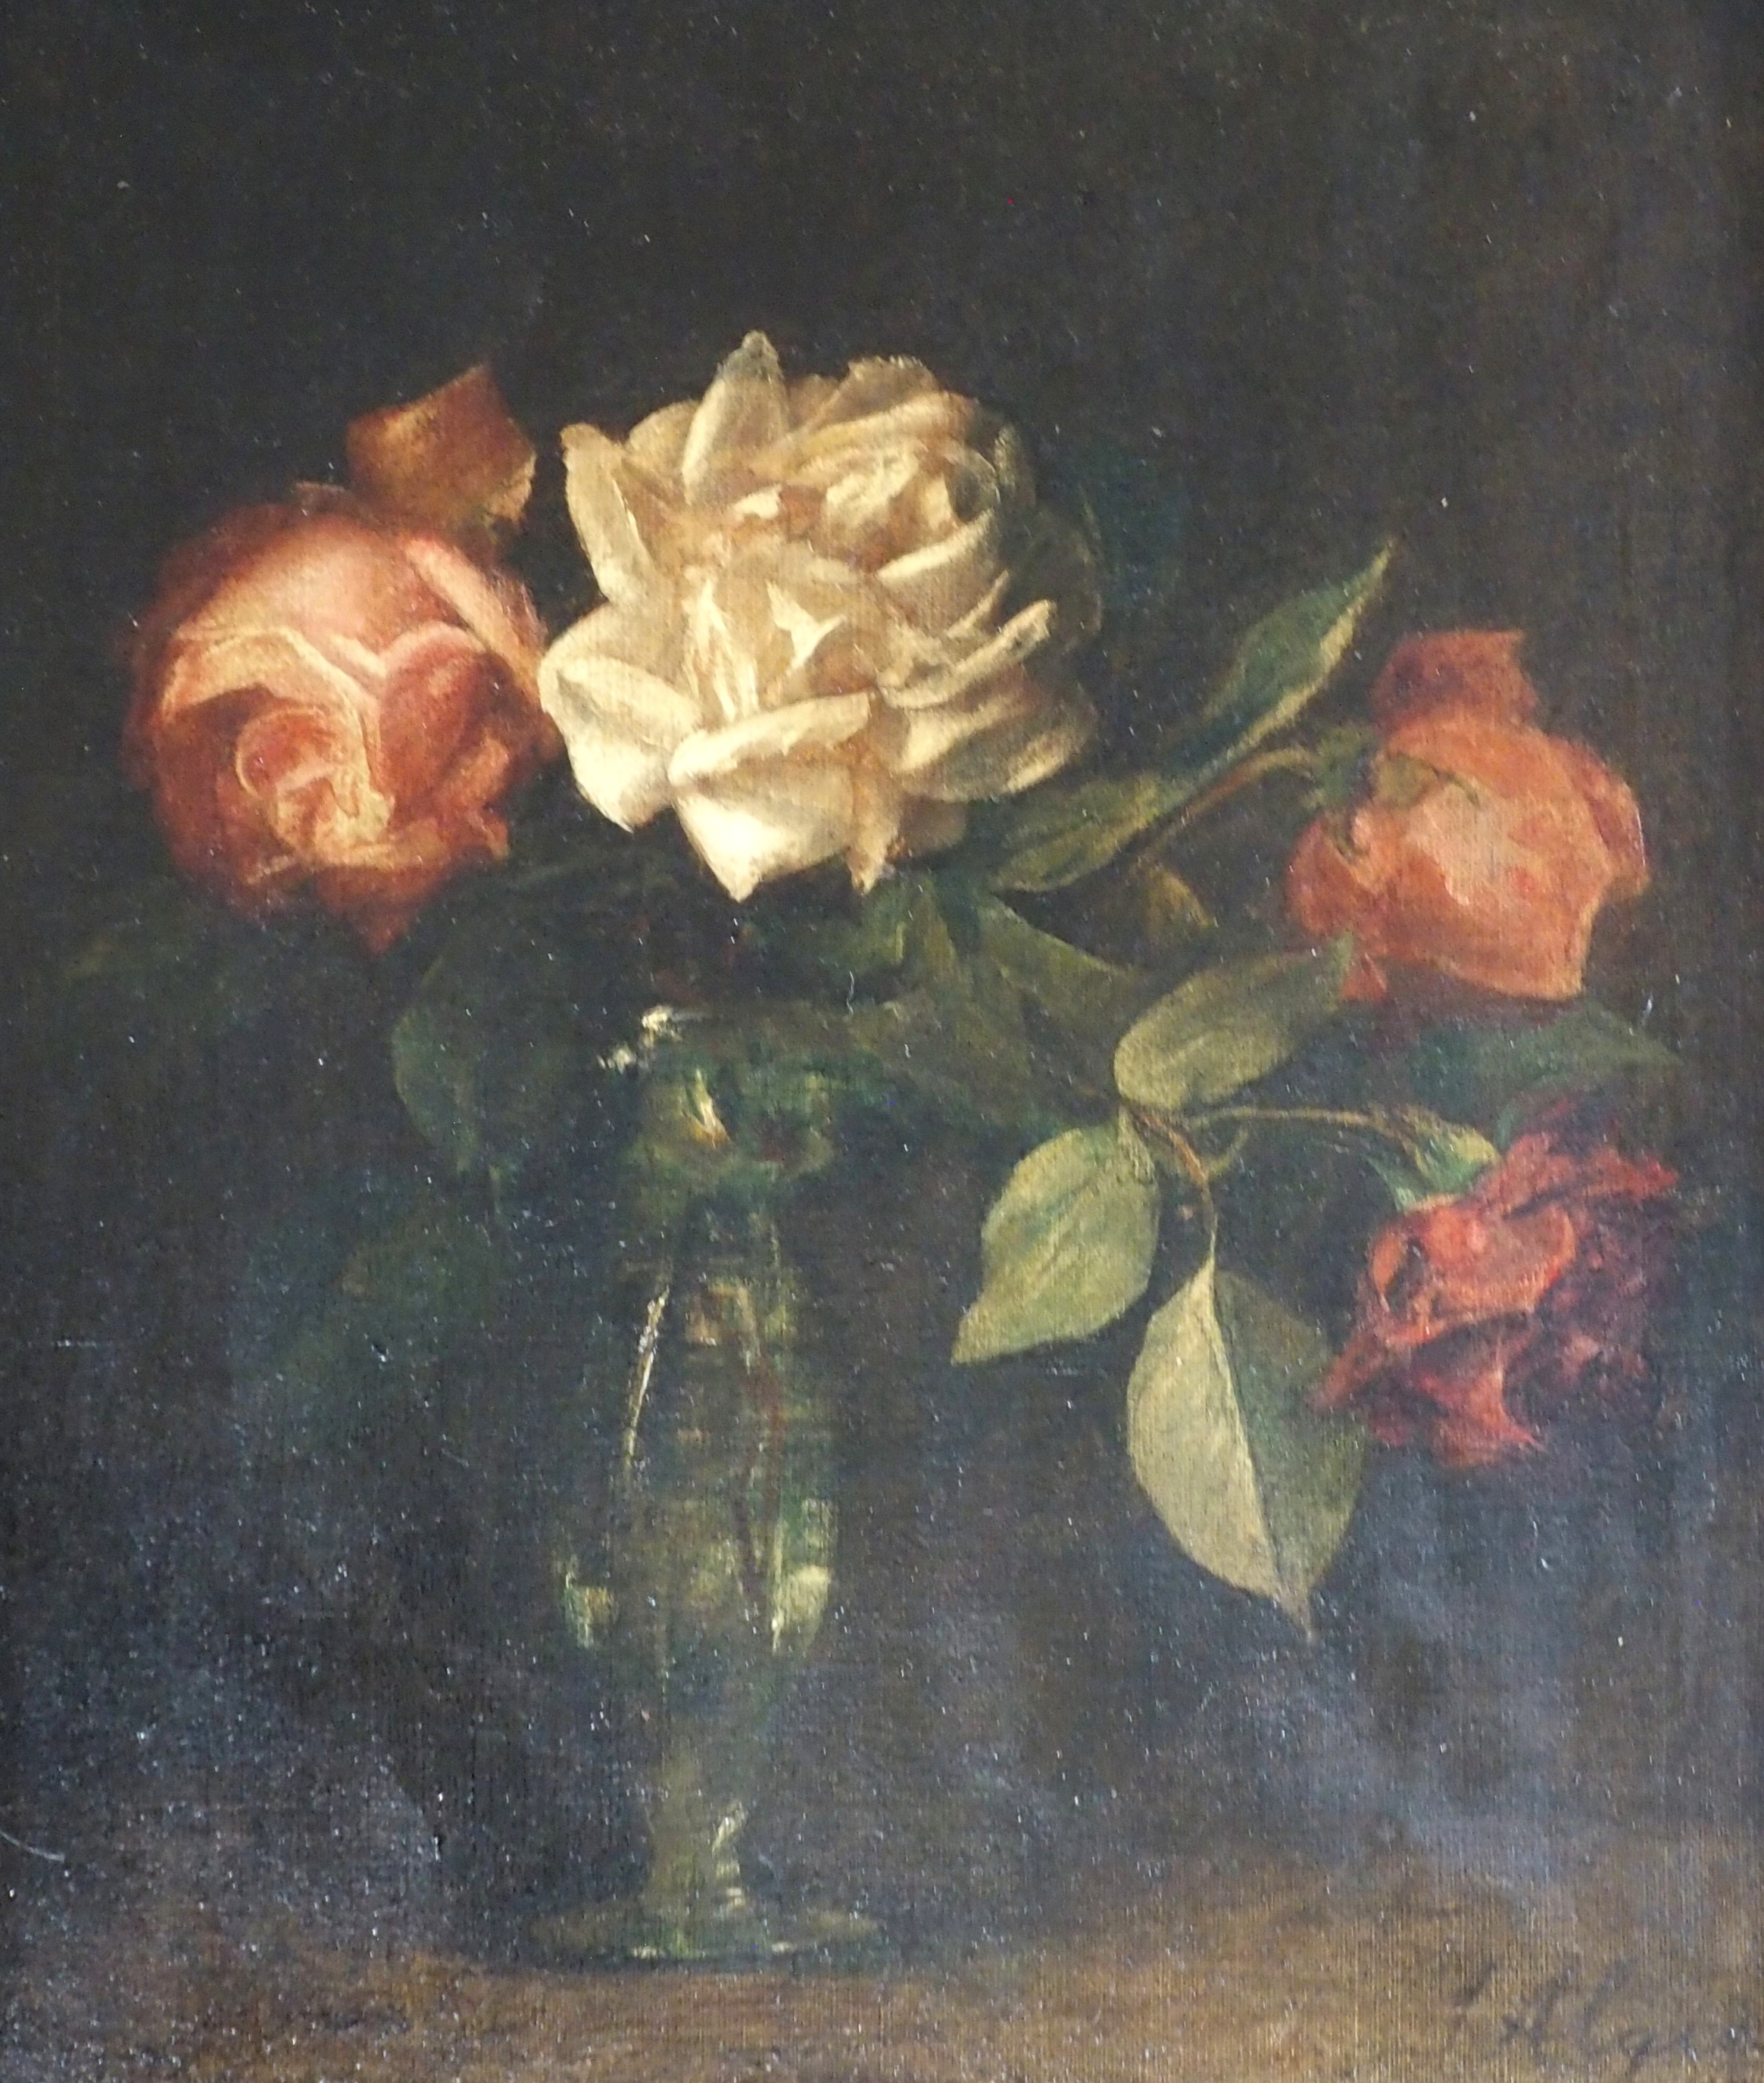 JESSIE ALGIE (SCOTTISH 1859-1927) ROSES IN A GLASS VASE Oil on canvas, signed, 35.5 x 30.5cm (14 x